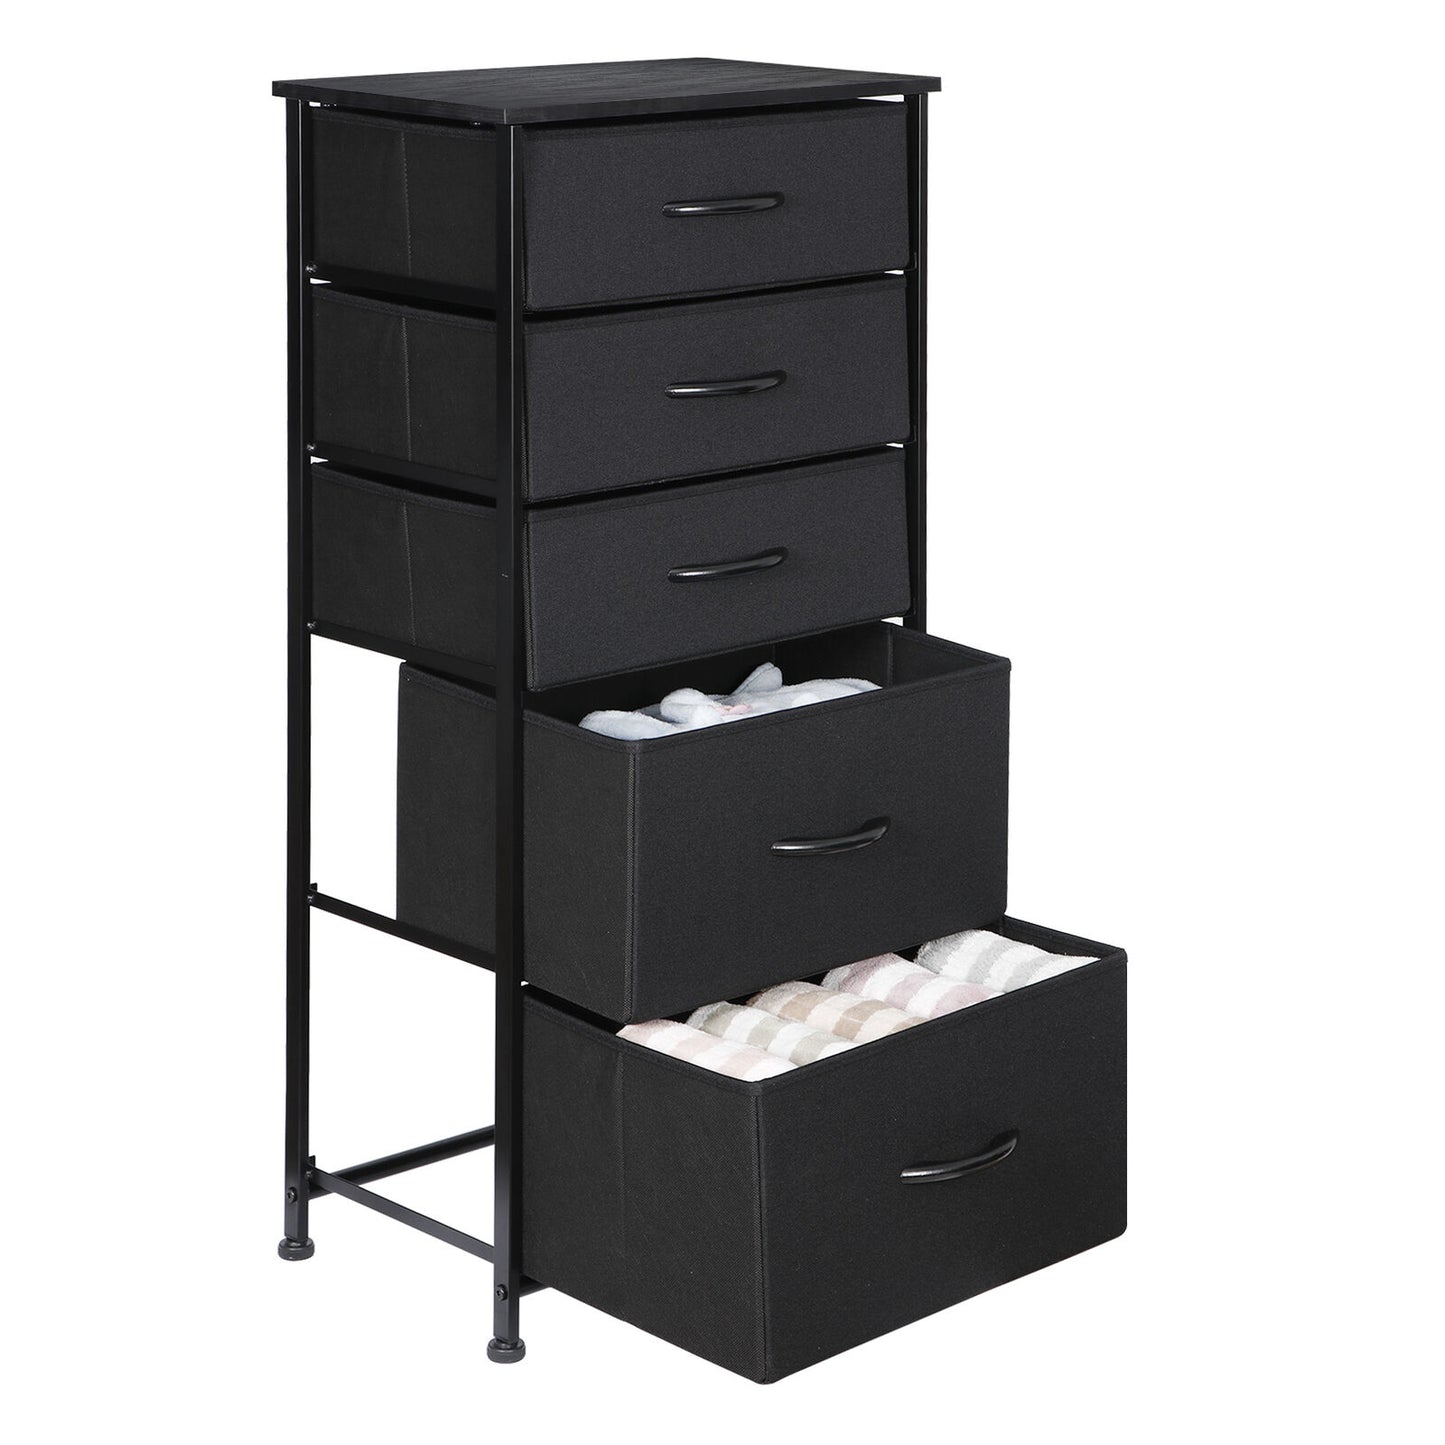 Dresser with 5 Drawers Fabric Storage Tower Organizer Unit for Bedroom Grey